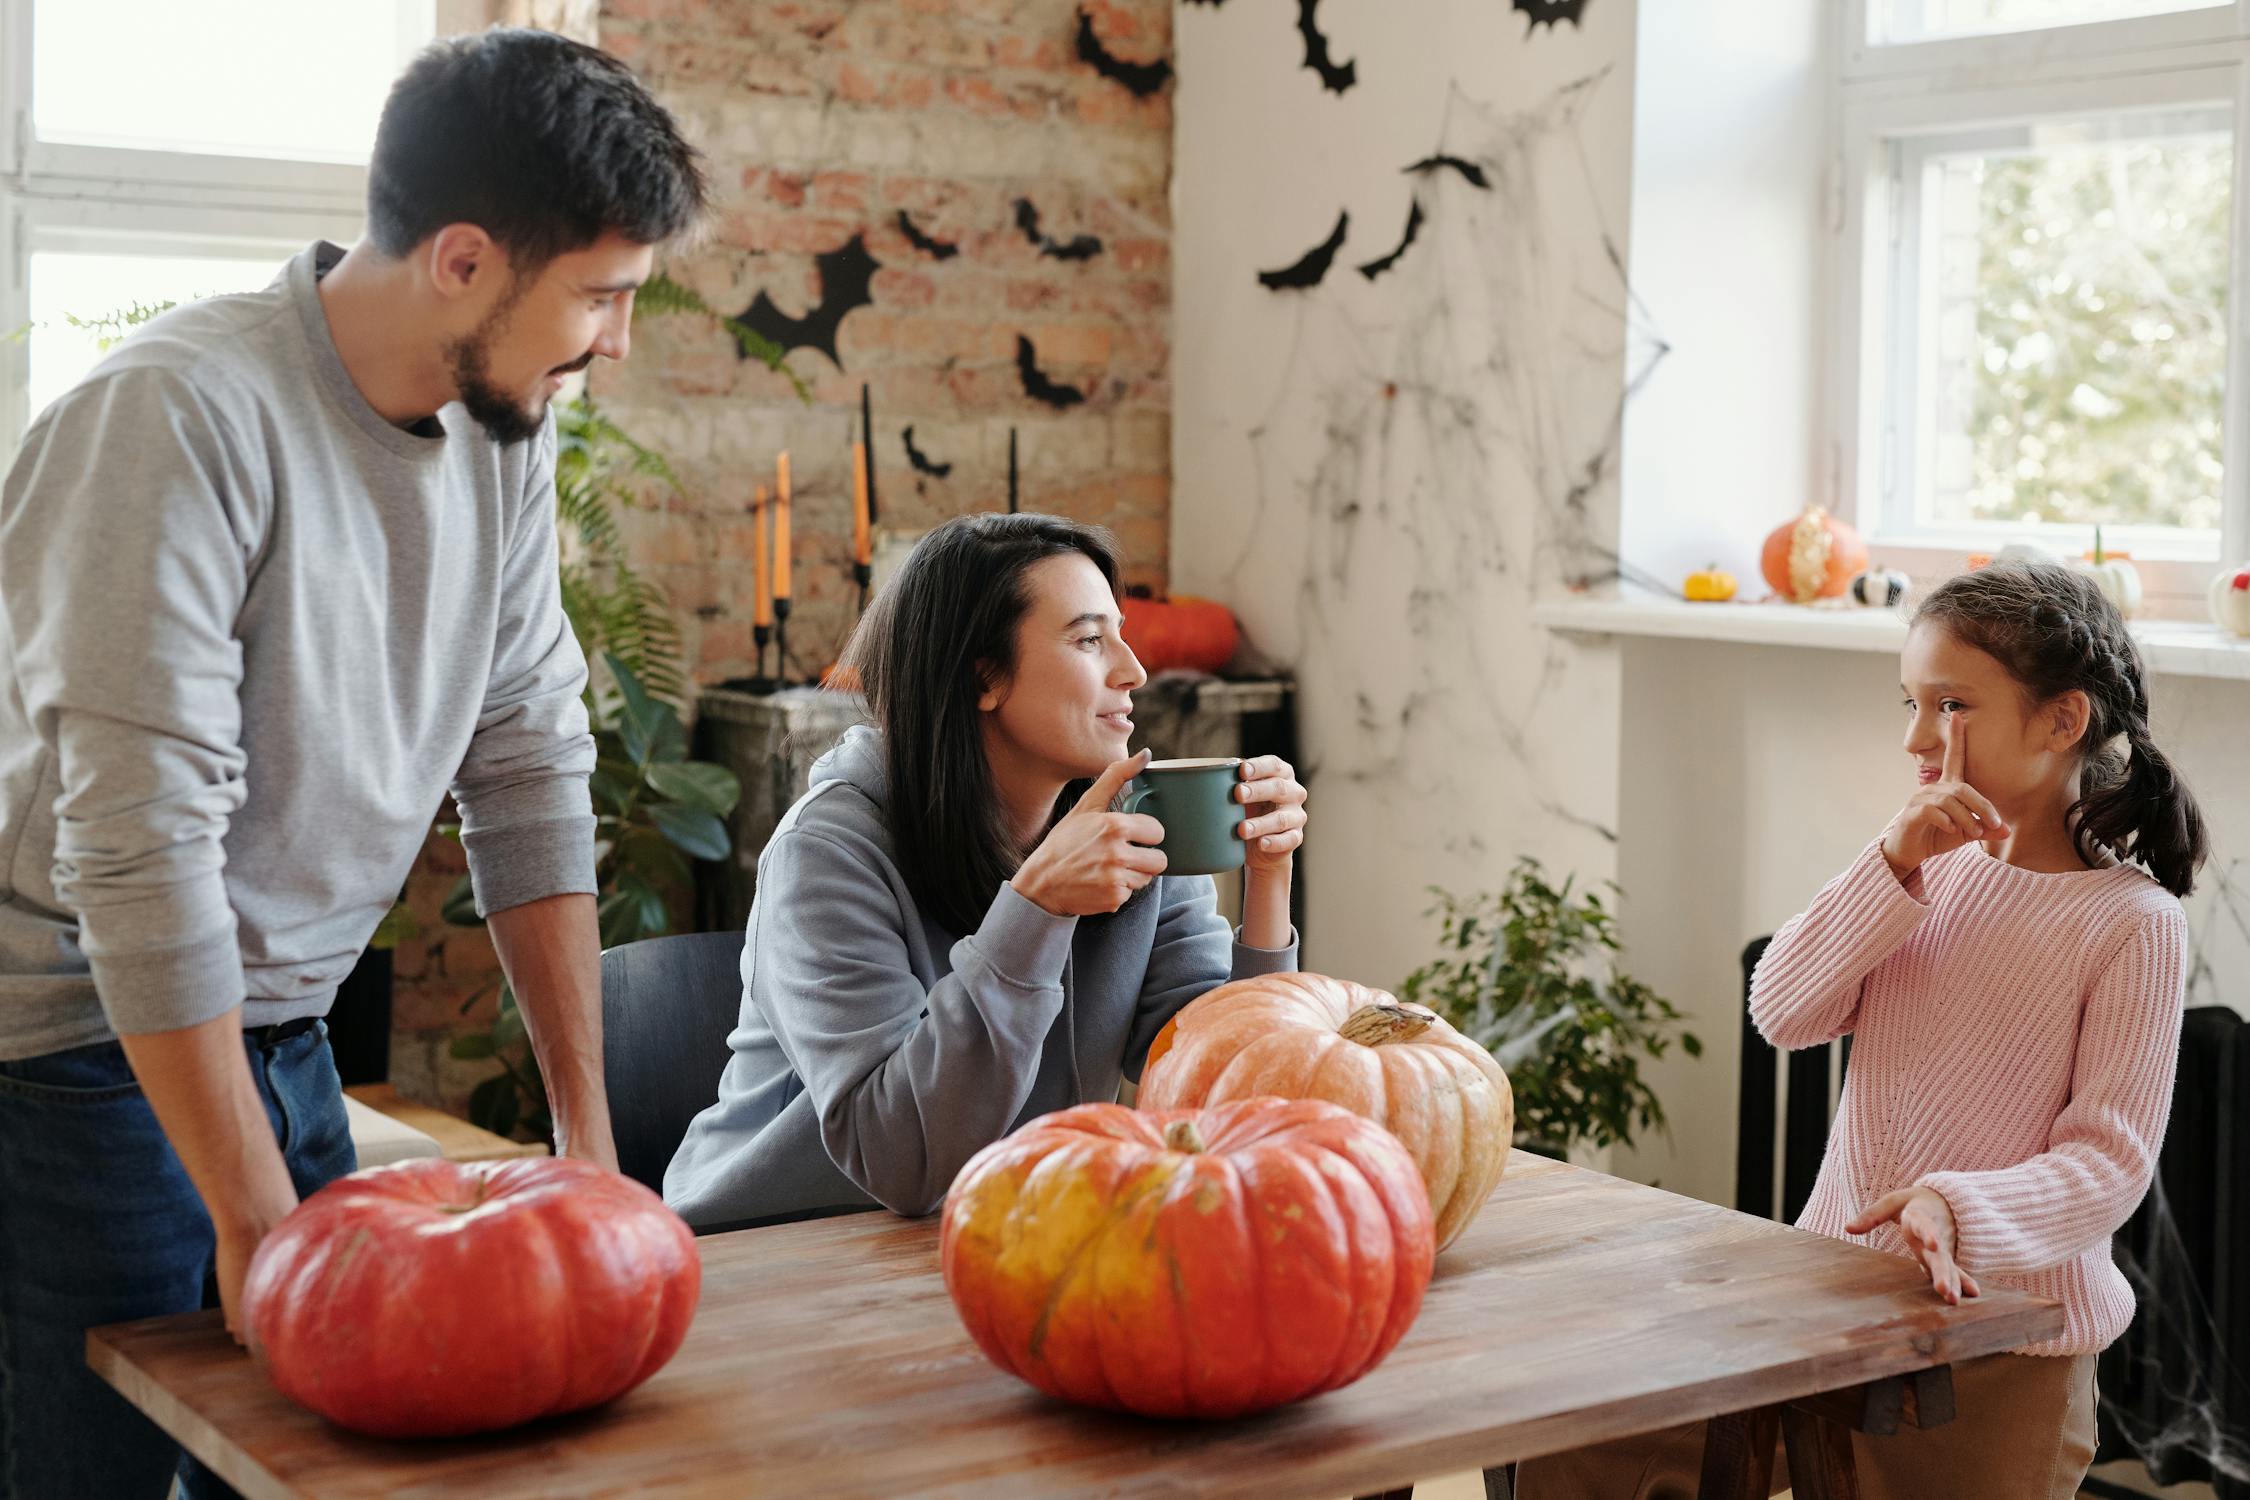 A family sat around a table filled with pumpkins and with Halloween decorations up in the background.